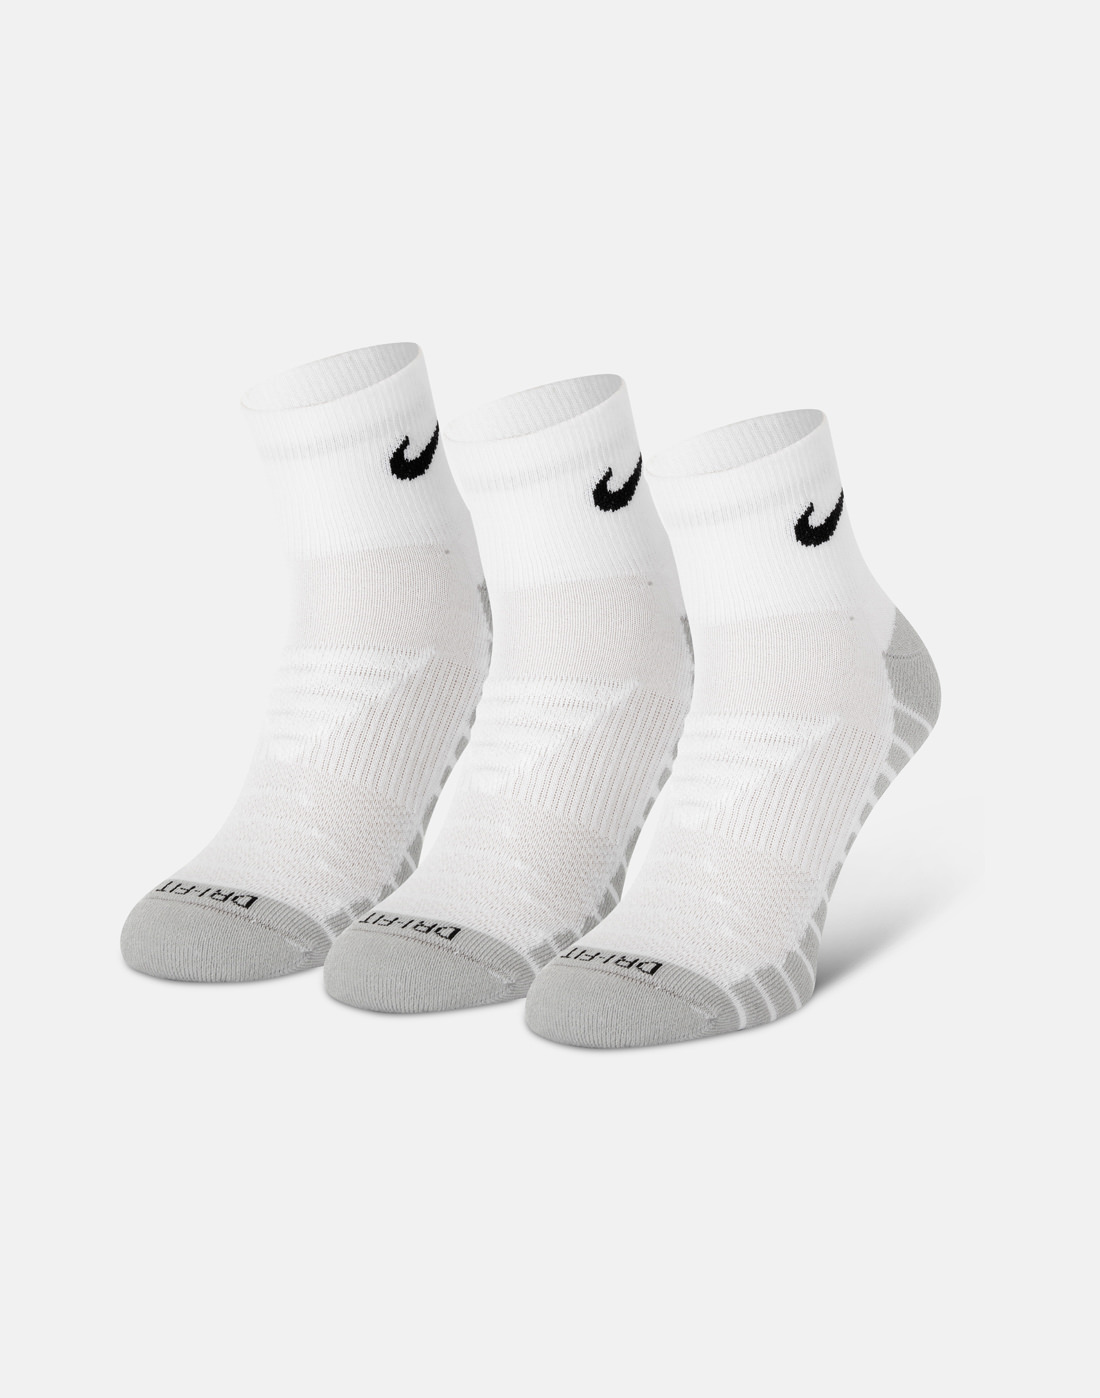 Nike Everyday Cushion 3 Pack Ankle Socks - White | Life Style Sports IE